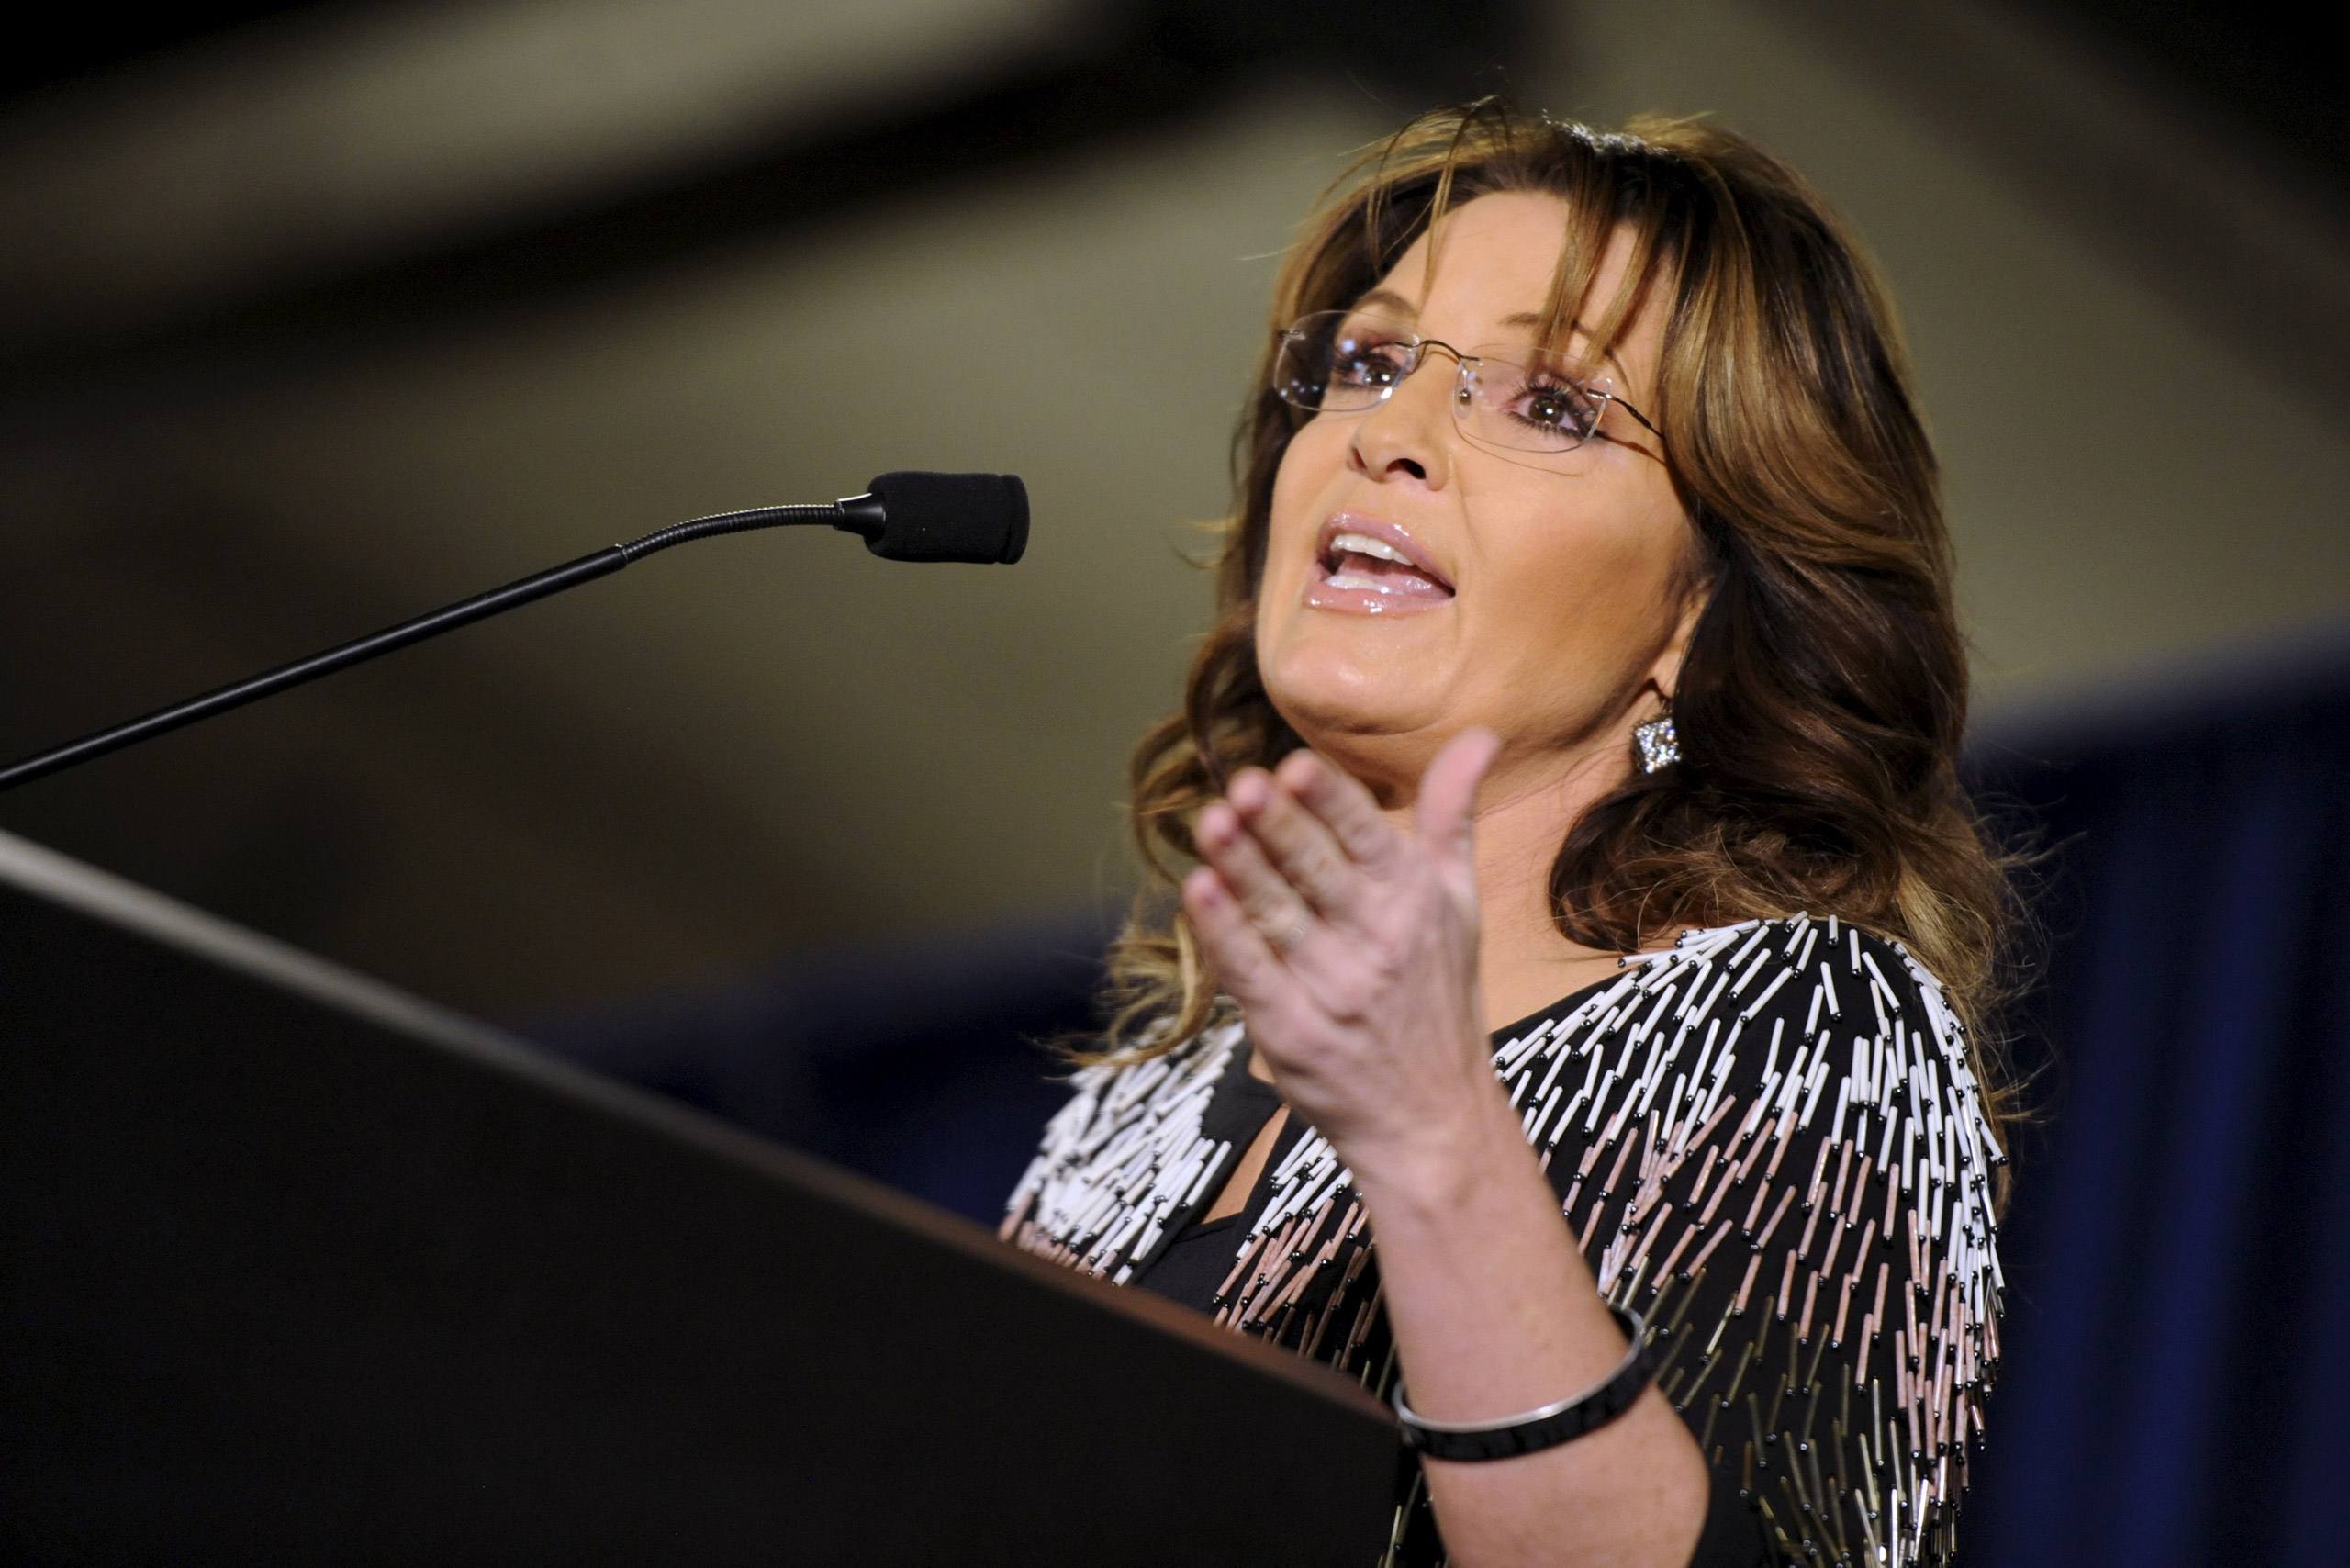 Former Alaska Gov. Sarah Palin speaks at a rally endorsing U.S. Republican presidential candidate Donald Trump for President at Iowa State University in Ames, Iowa January 19, 2016. REUTERS/Mark Kauzlarich